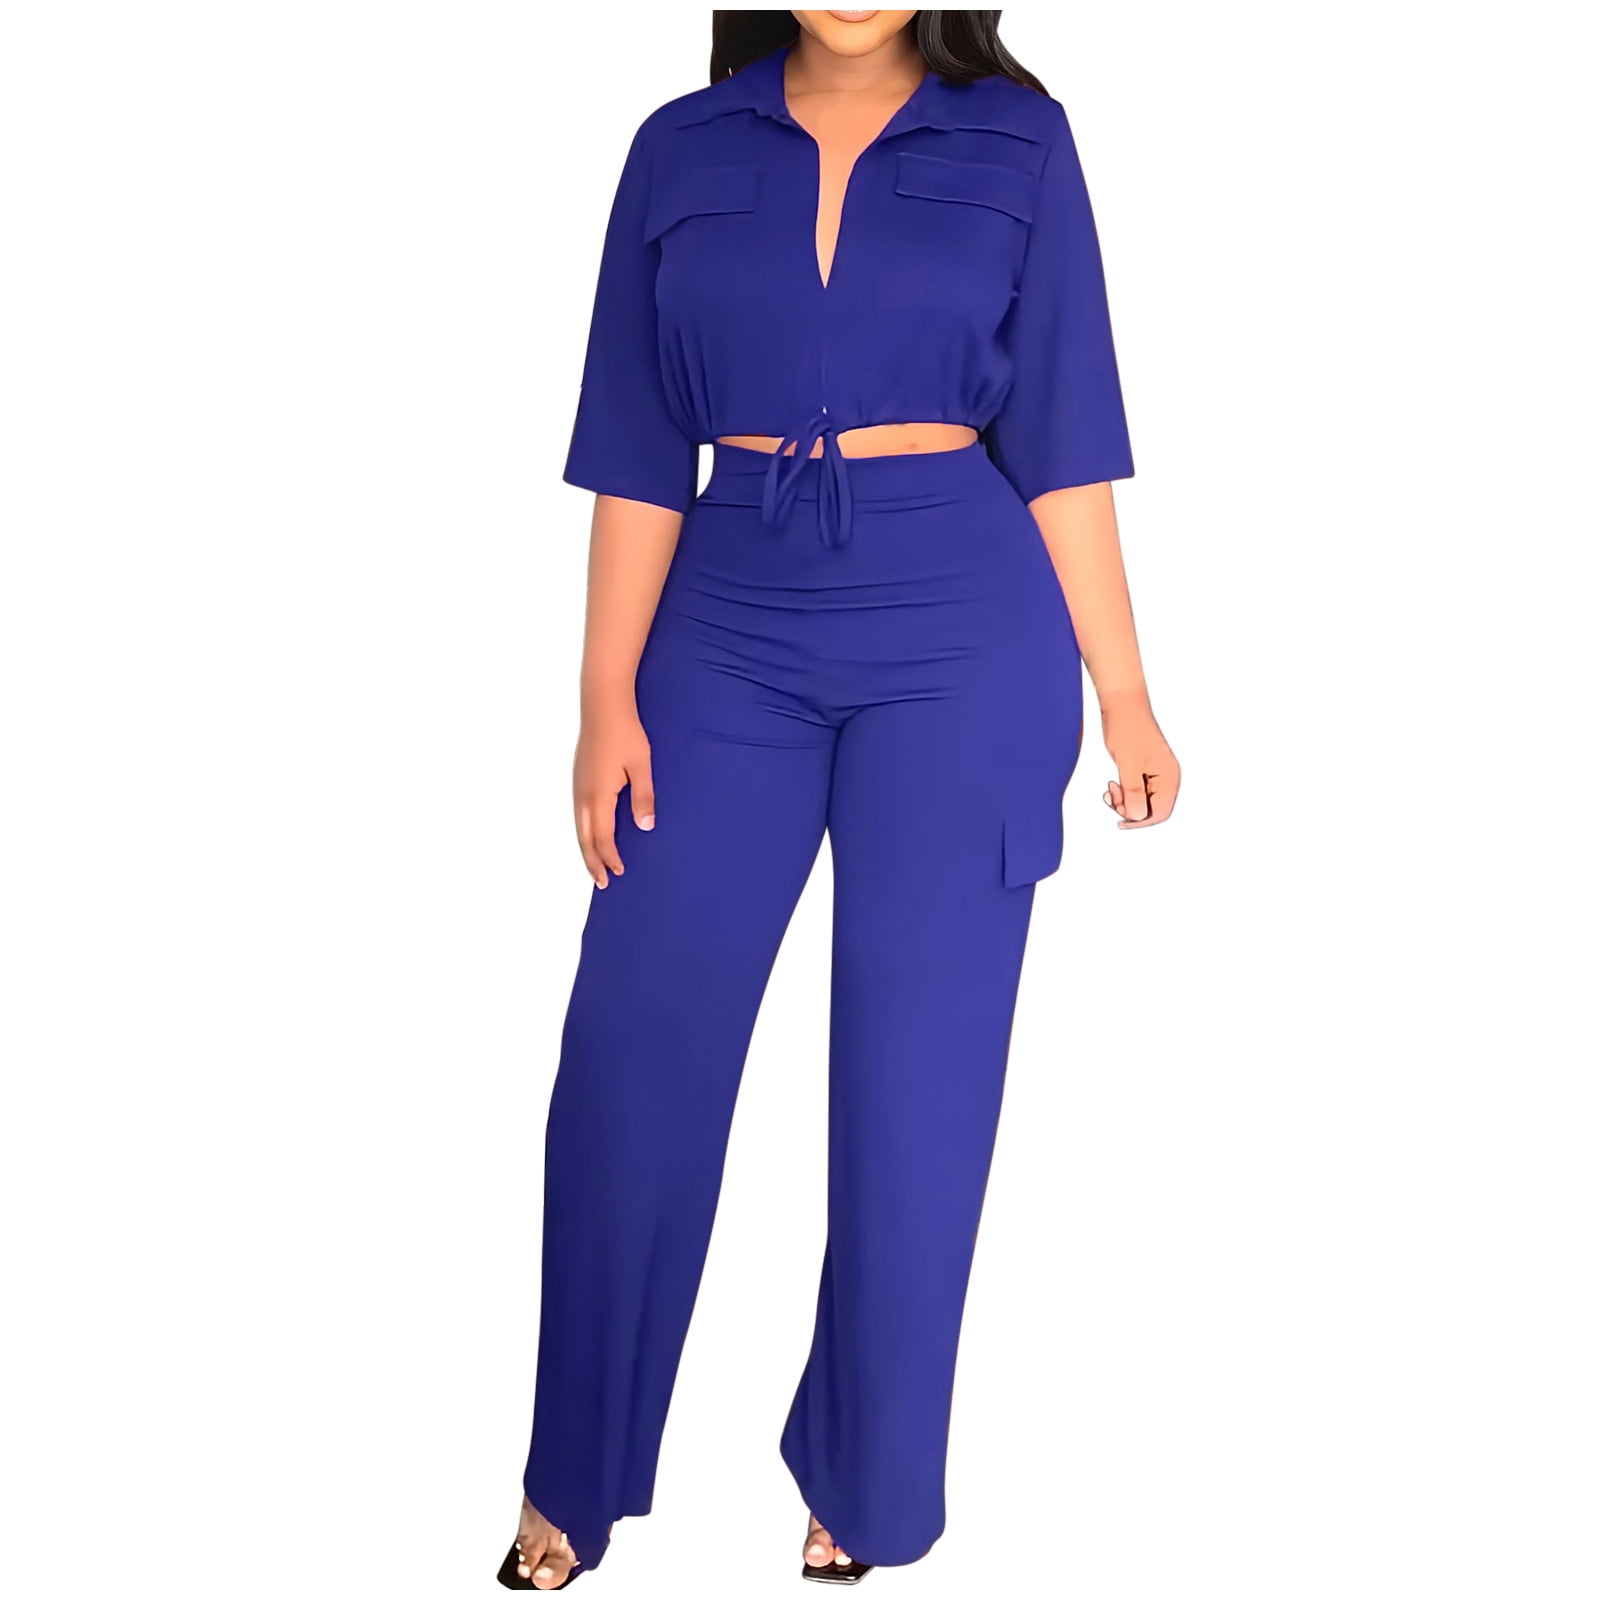 Women's Matching Two-Piece Outfits & Co-Ord Sets – Fly VSJ, Women's Clothing  and Fashion Accessories